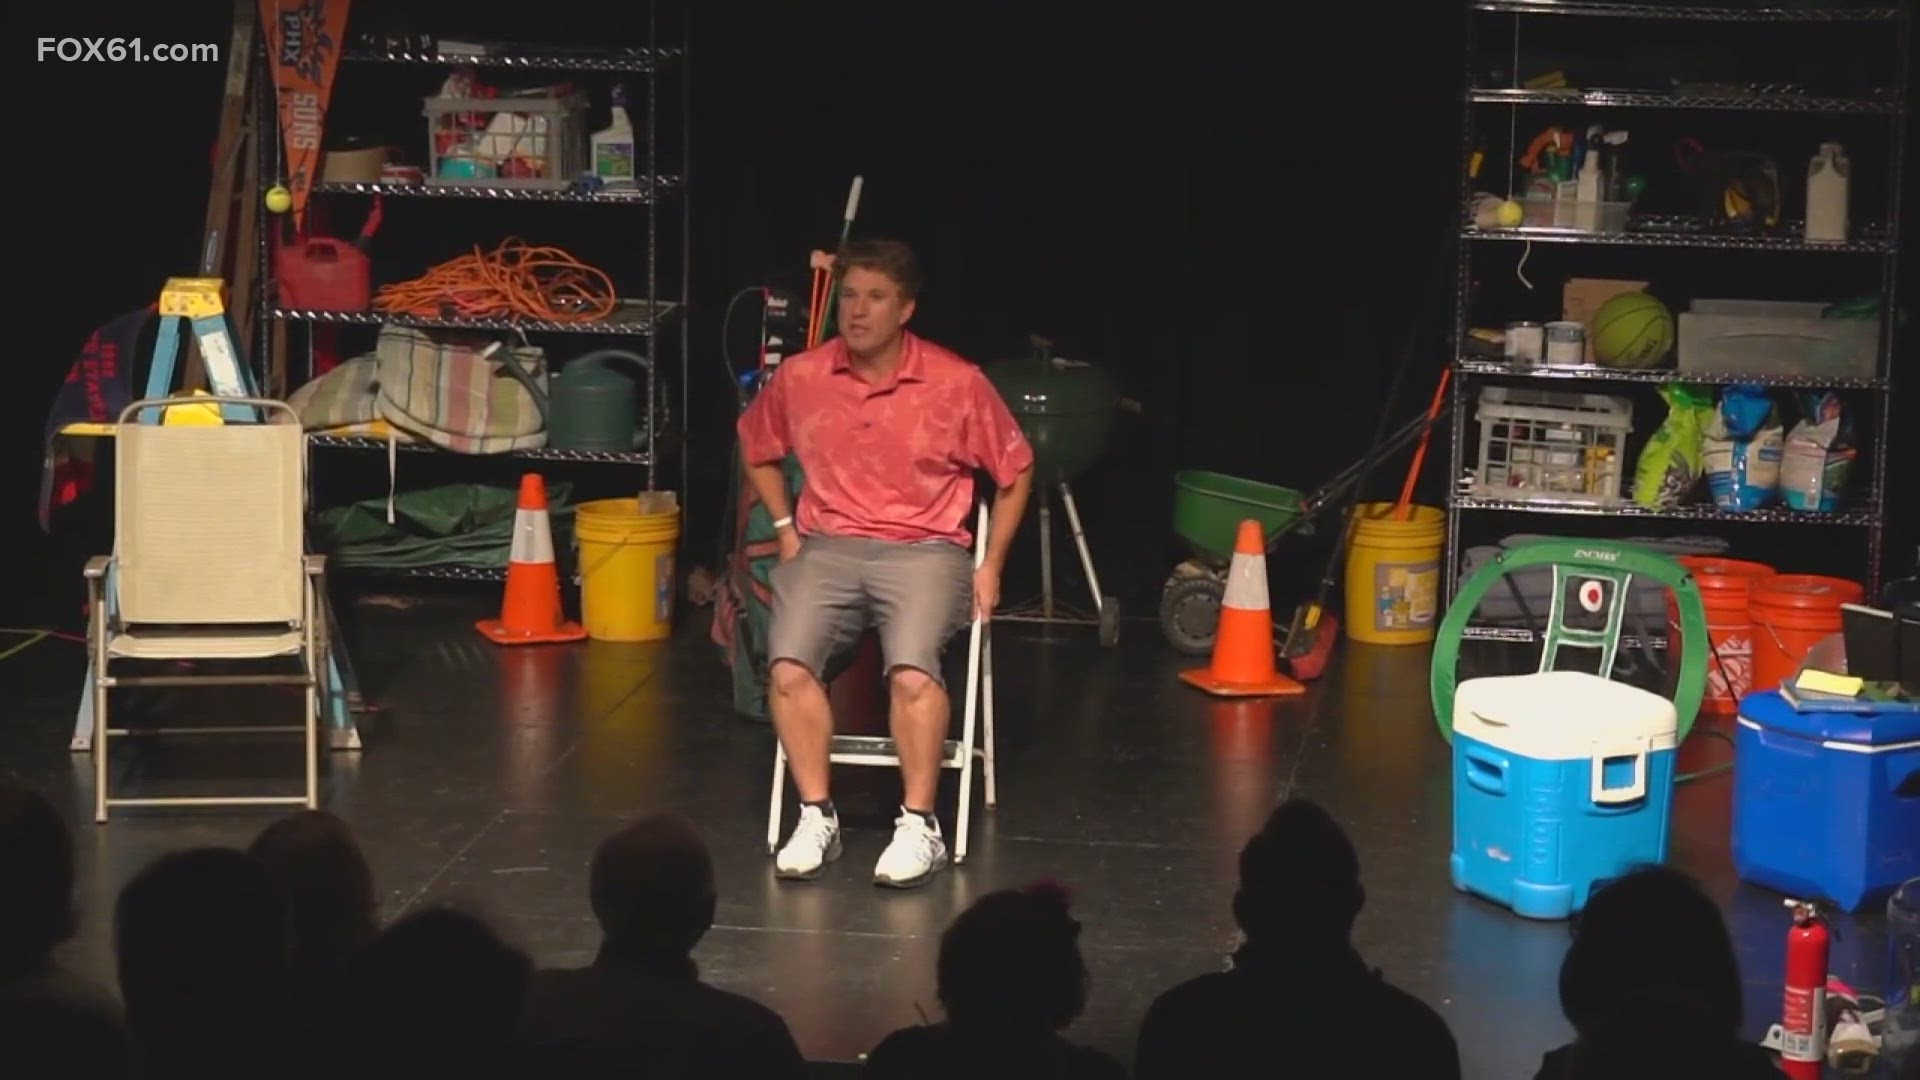 Chris Fuller, a writer and performer, shares about the autobiographical play "Cheese Fries and Chili Dip," showing at the Seven Angels Theatre in Waterbury.